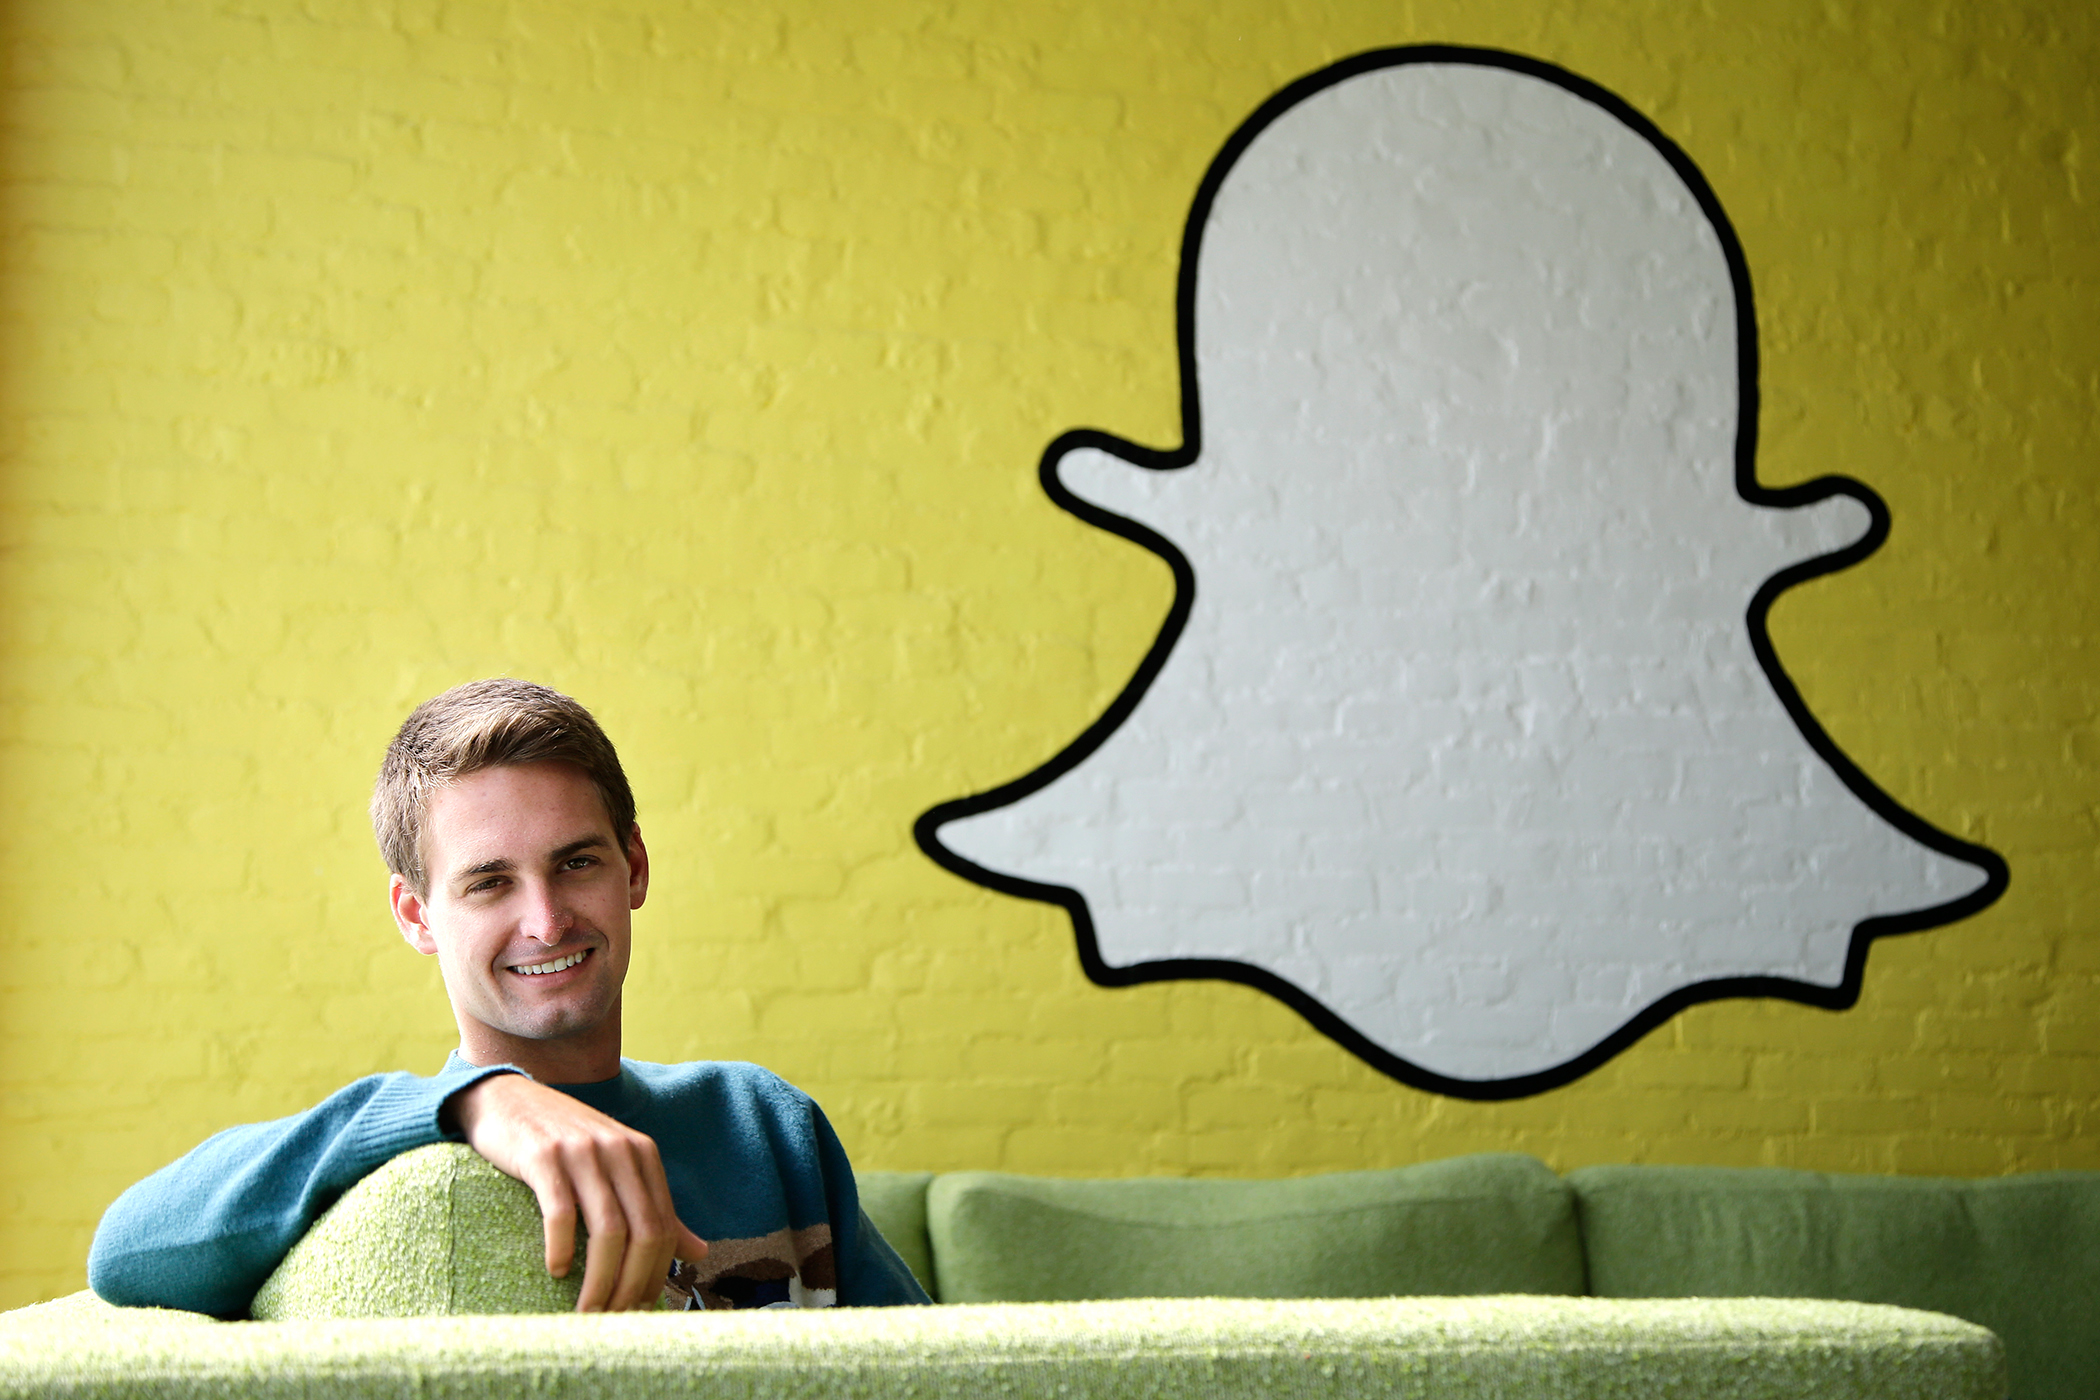 This October 24, 2013 file photo shows Snapchat CEO Evan Spiegel in Los Angeles.